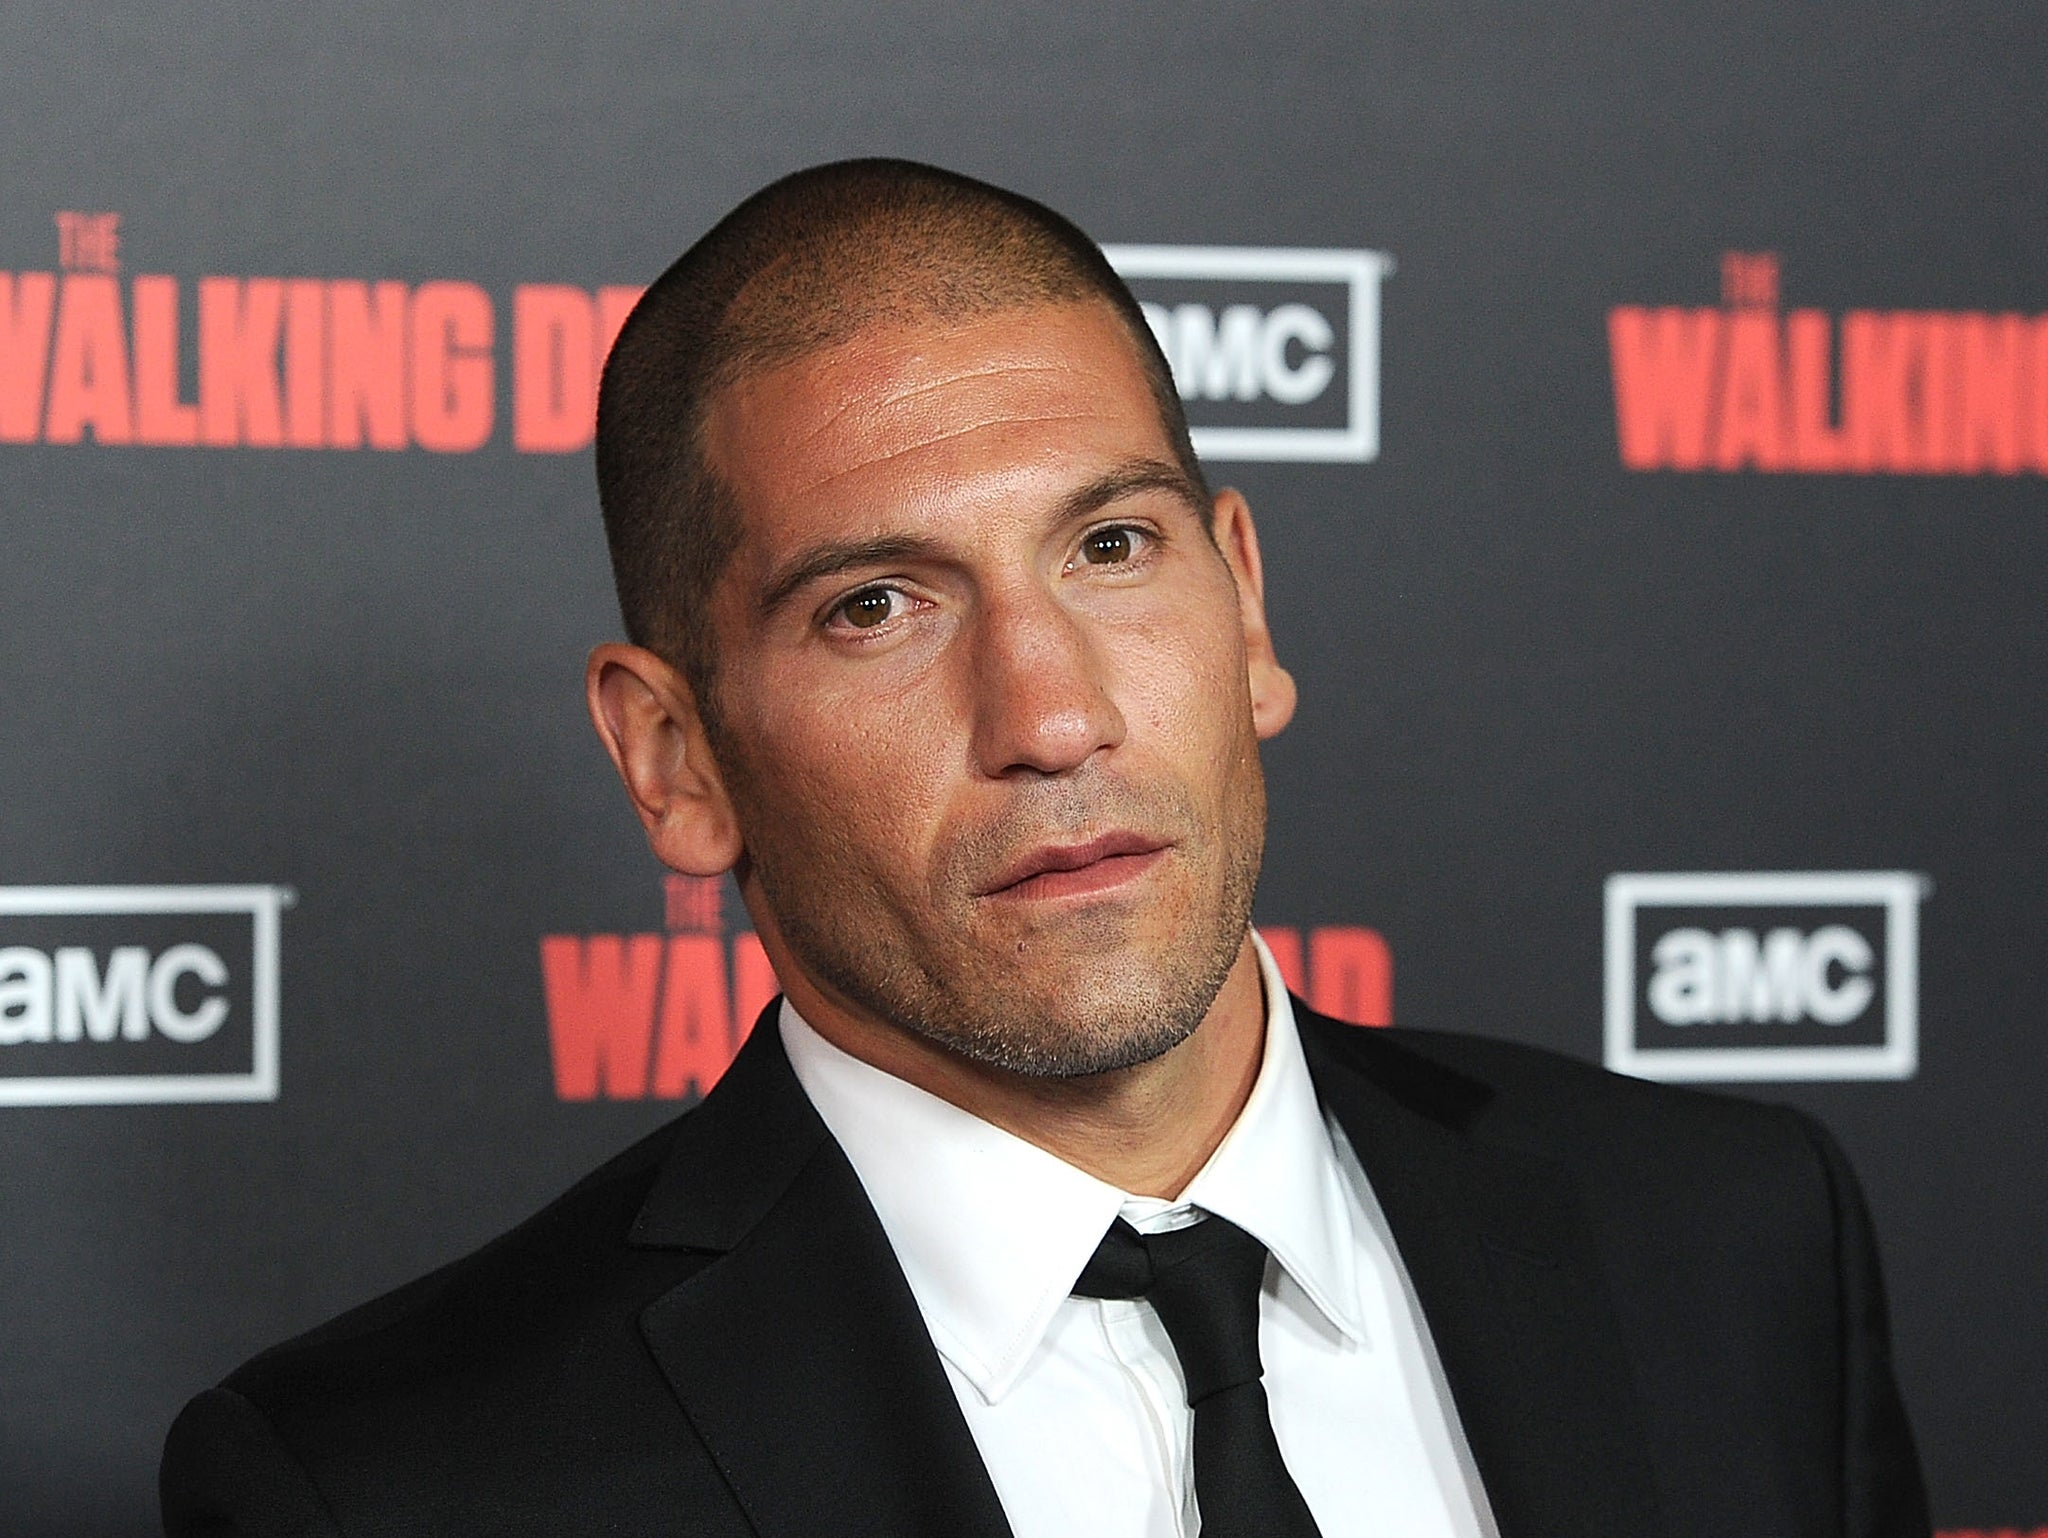 What Happened To Jon Bernthal's Punisher In His Marvel Netflix Show